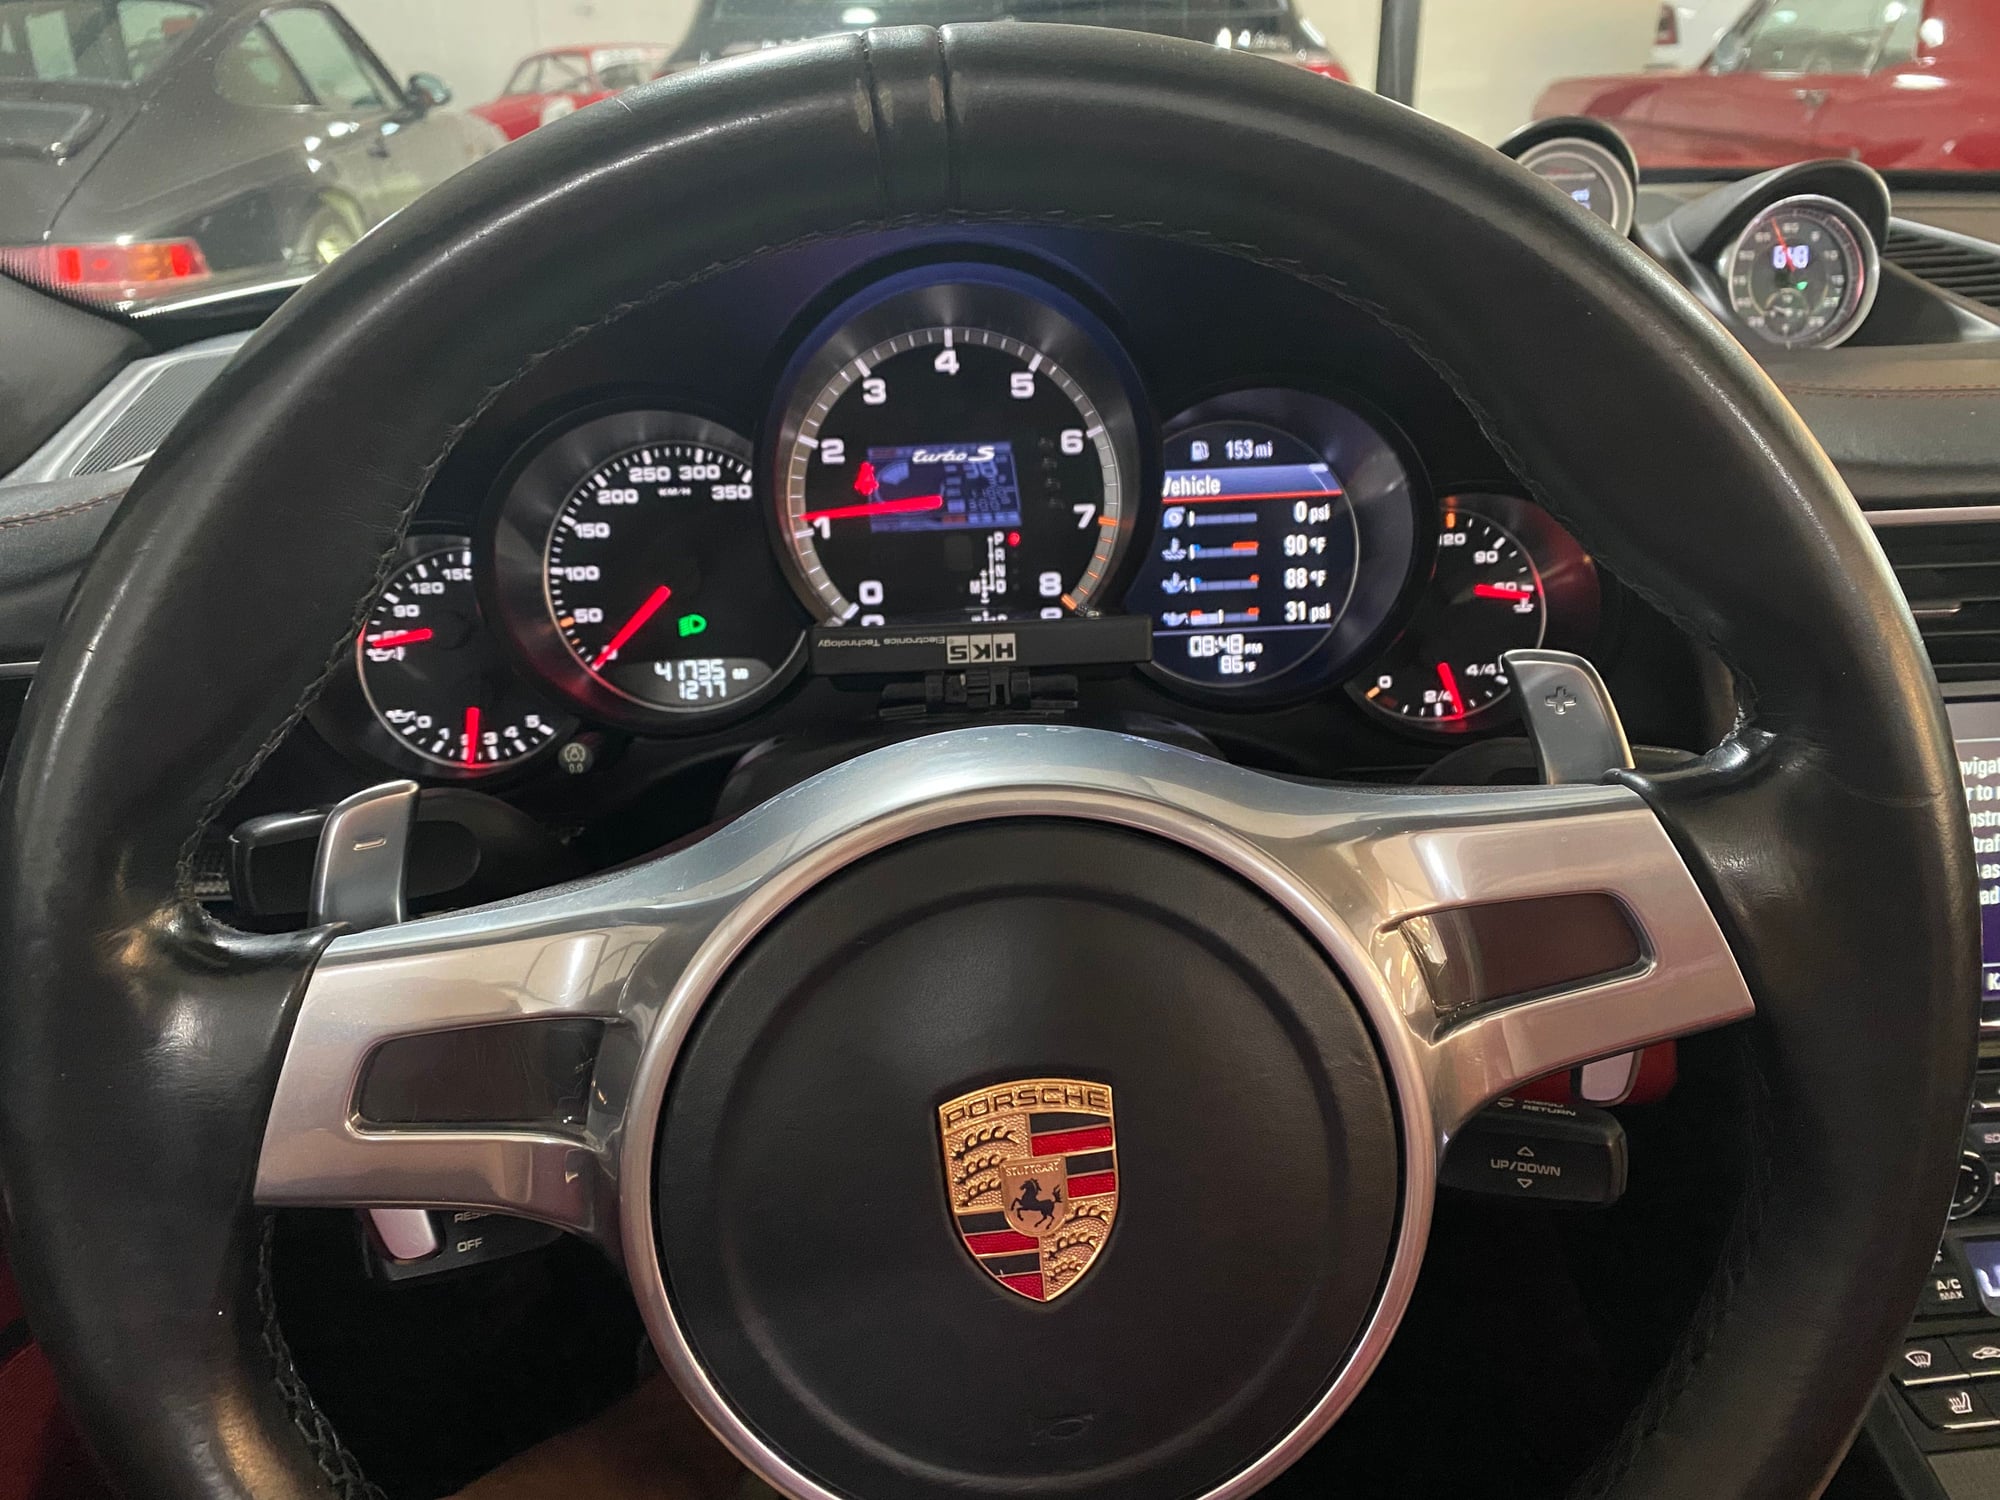 2014 Porsche 911 - 1000 HP 991.1TTS Cab ByDesign XR 4.0 liter - Used - VIN WP0CD2A95ES173079 - 41,000 Miles - AWD - Automatic - Black - Oklahoma City, OK 73116, United States